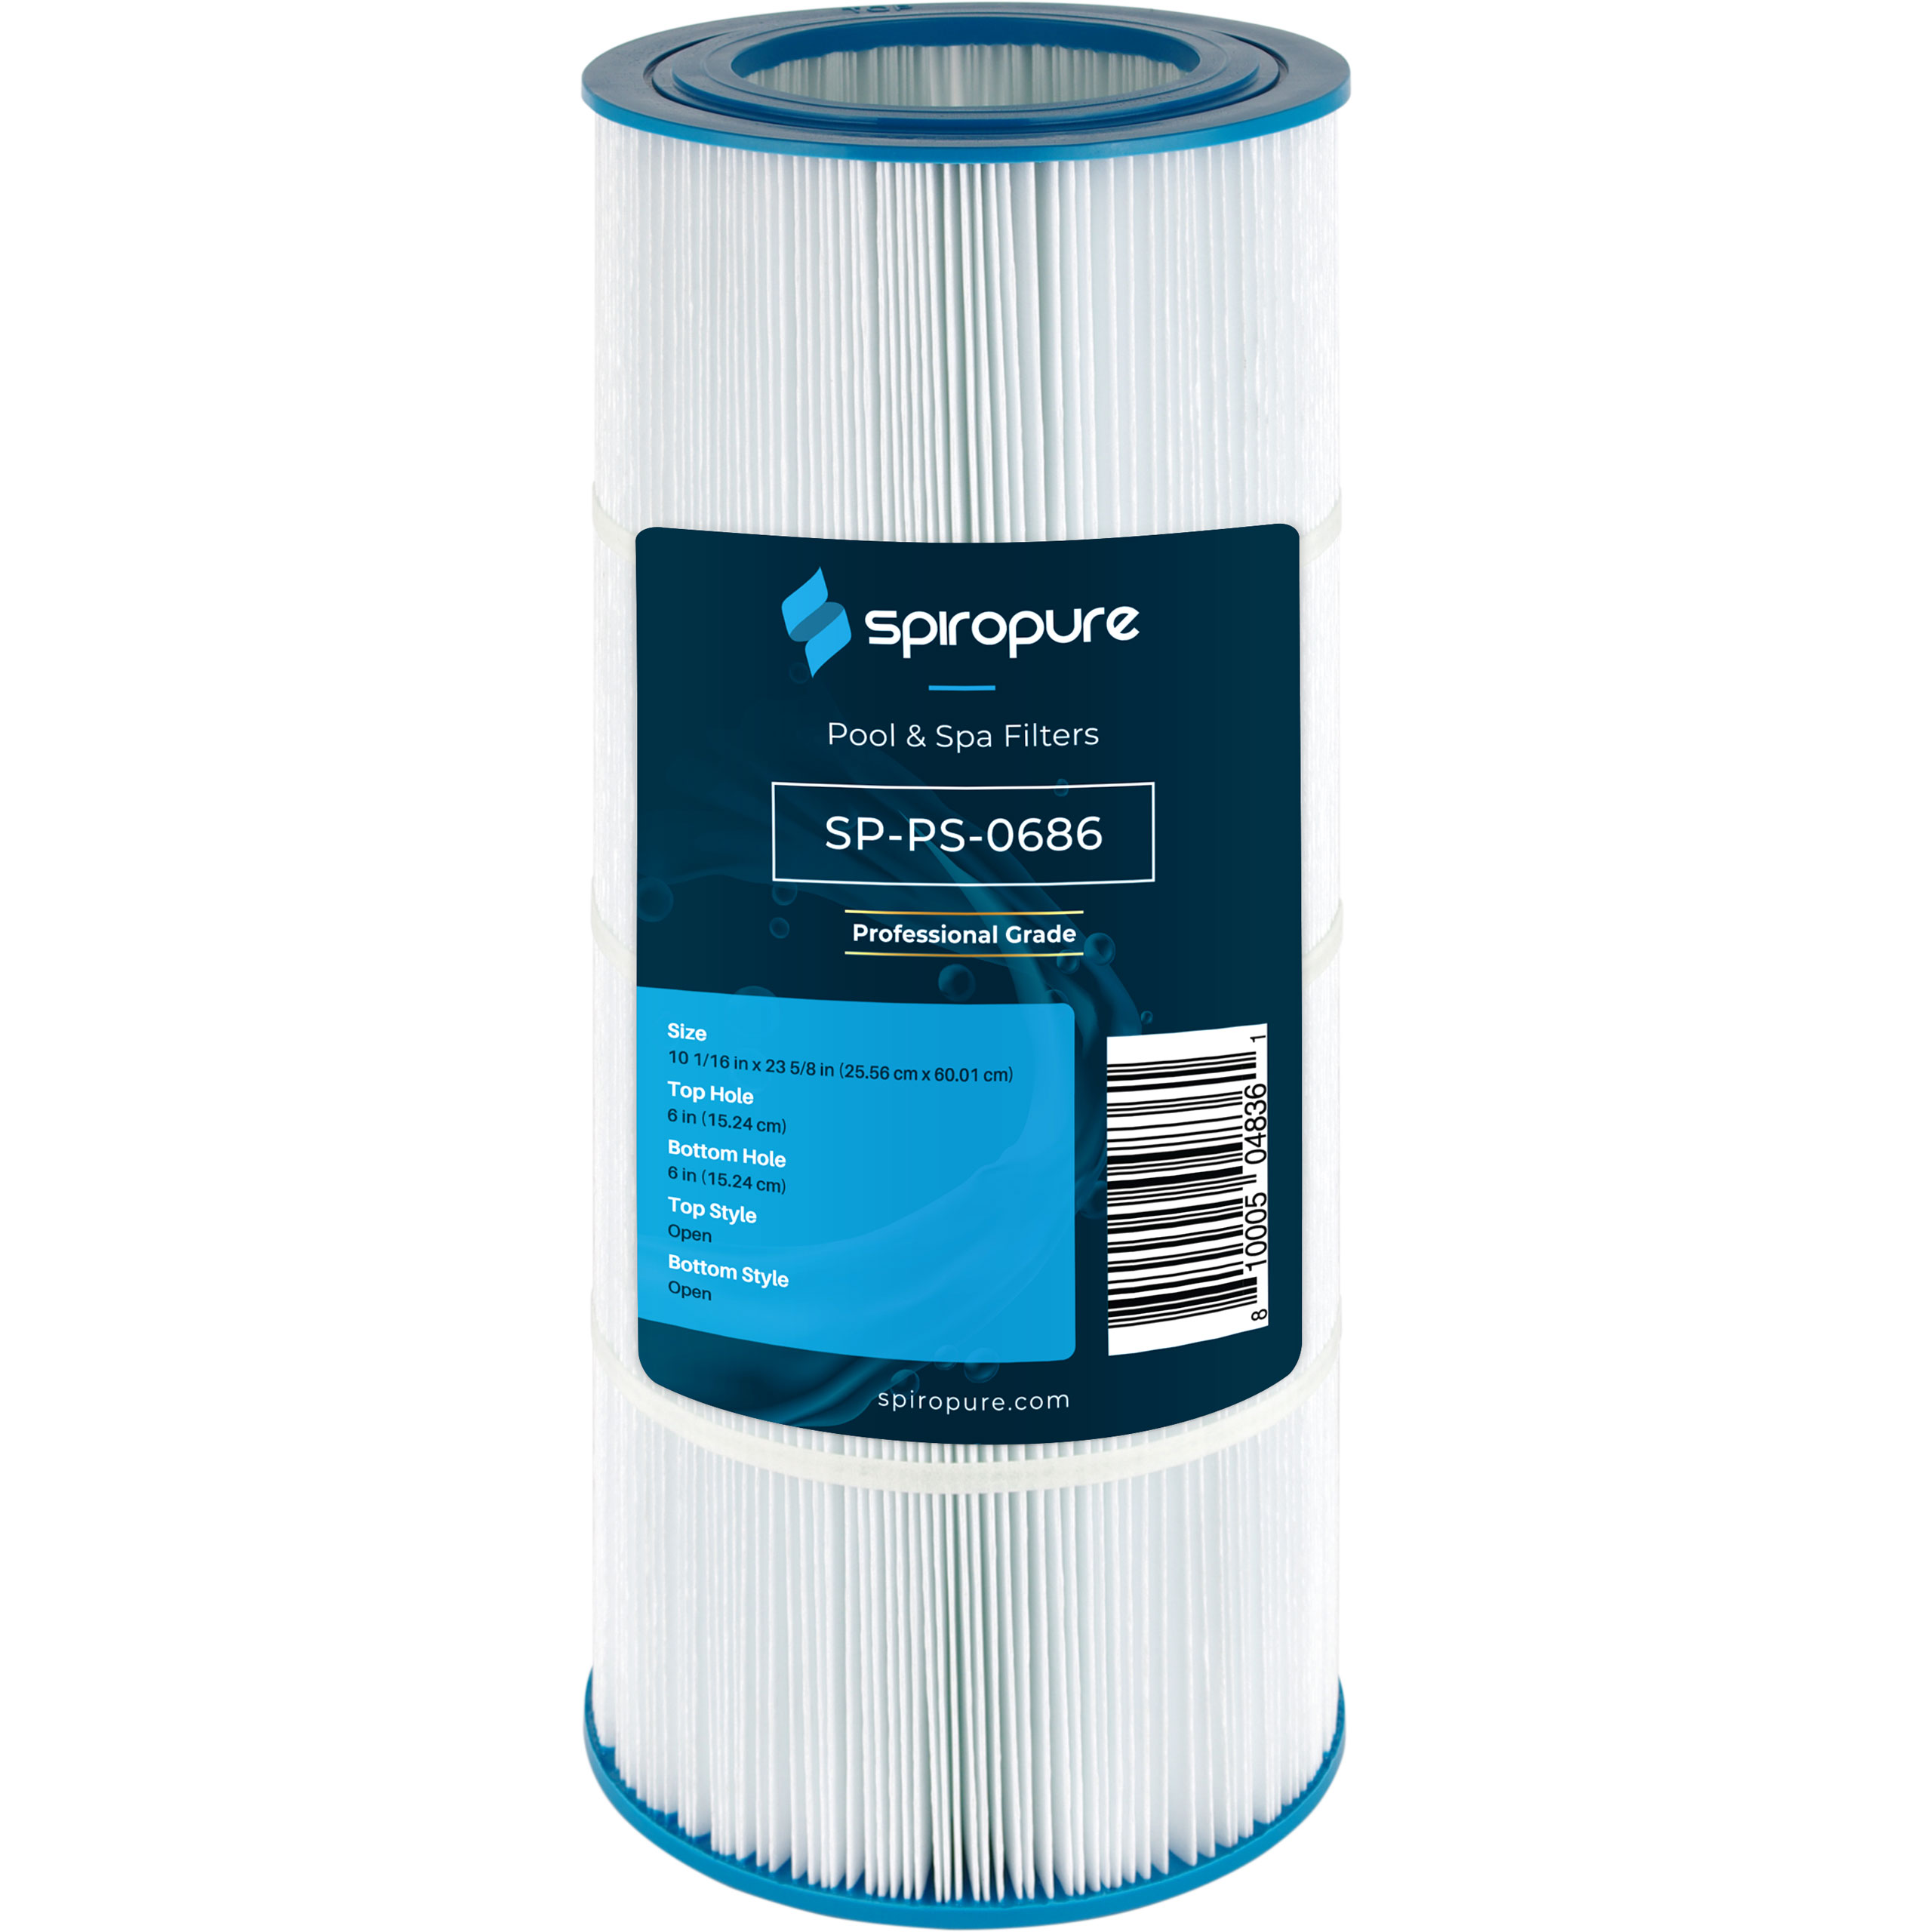 Premium Replacement Filter for ChipBLASTER 3536 4pc//Box = $55.00 Each